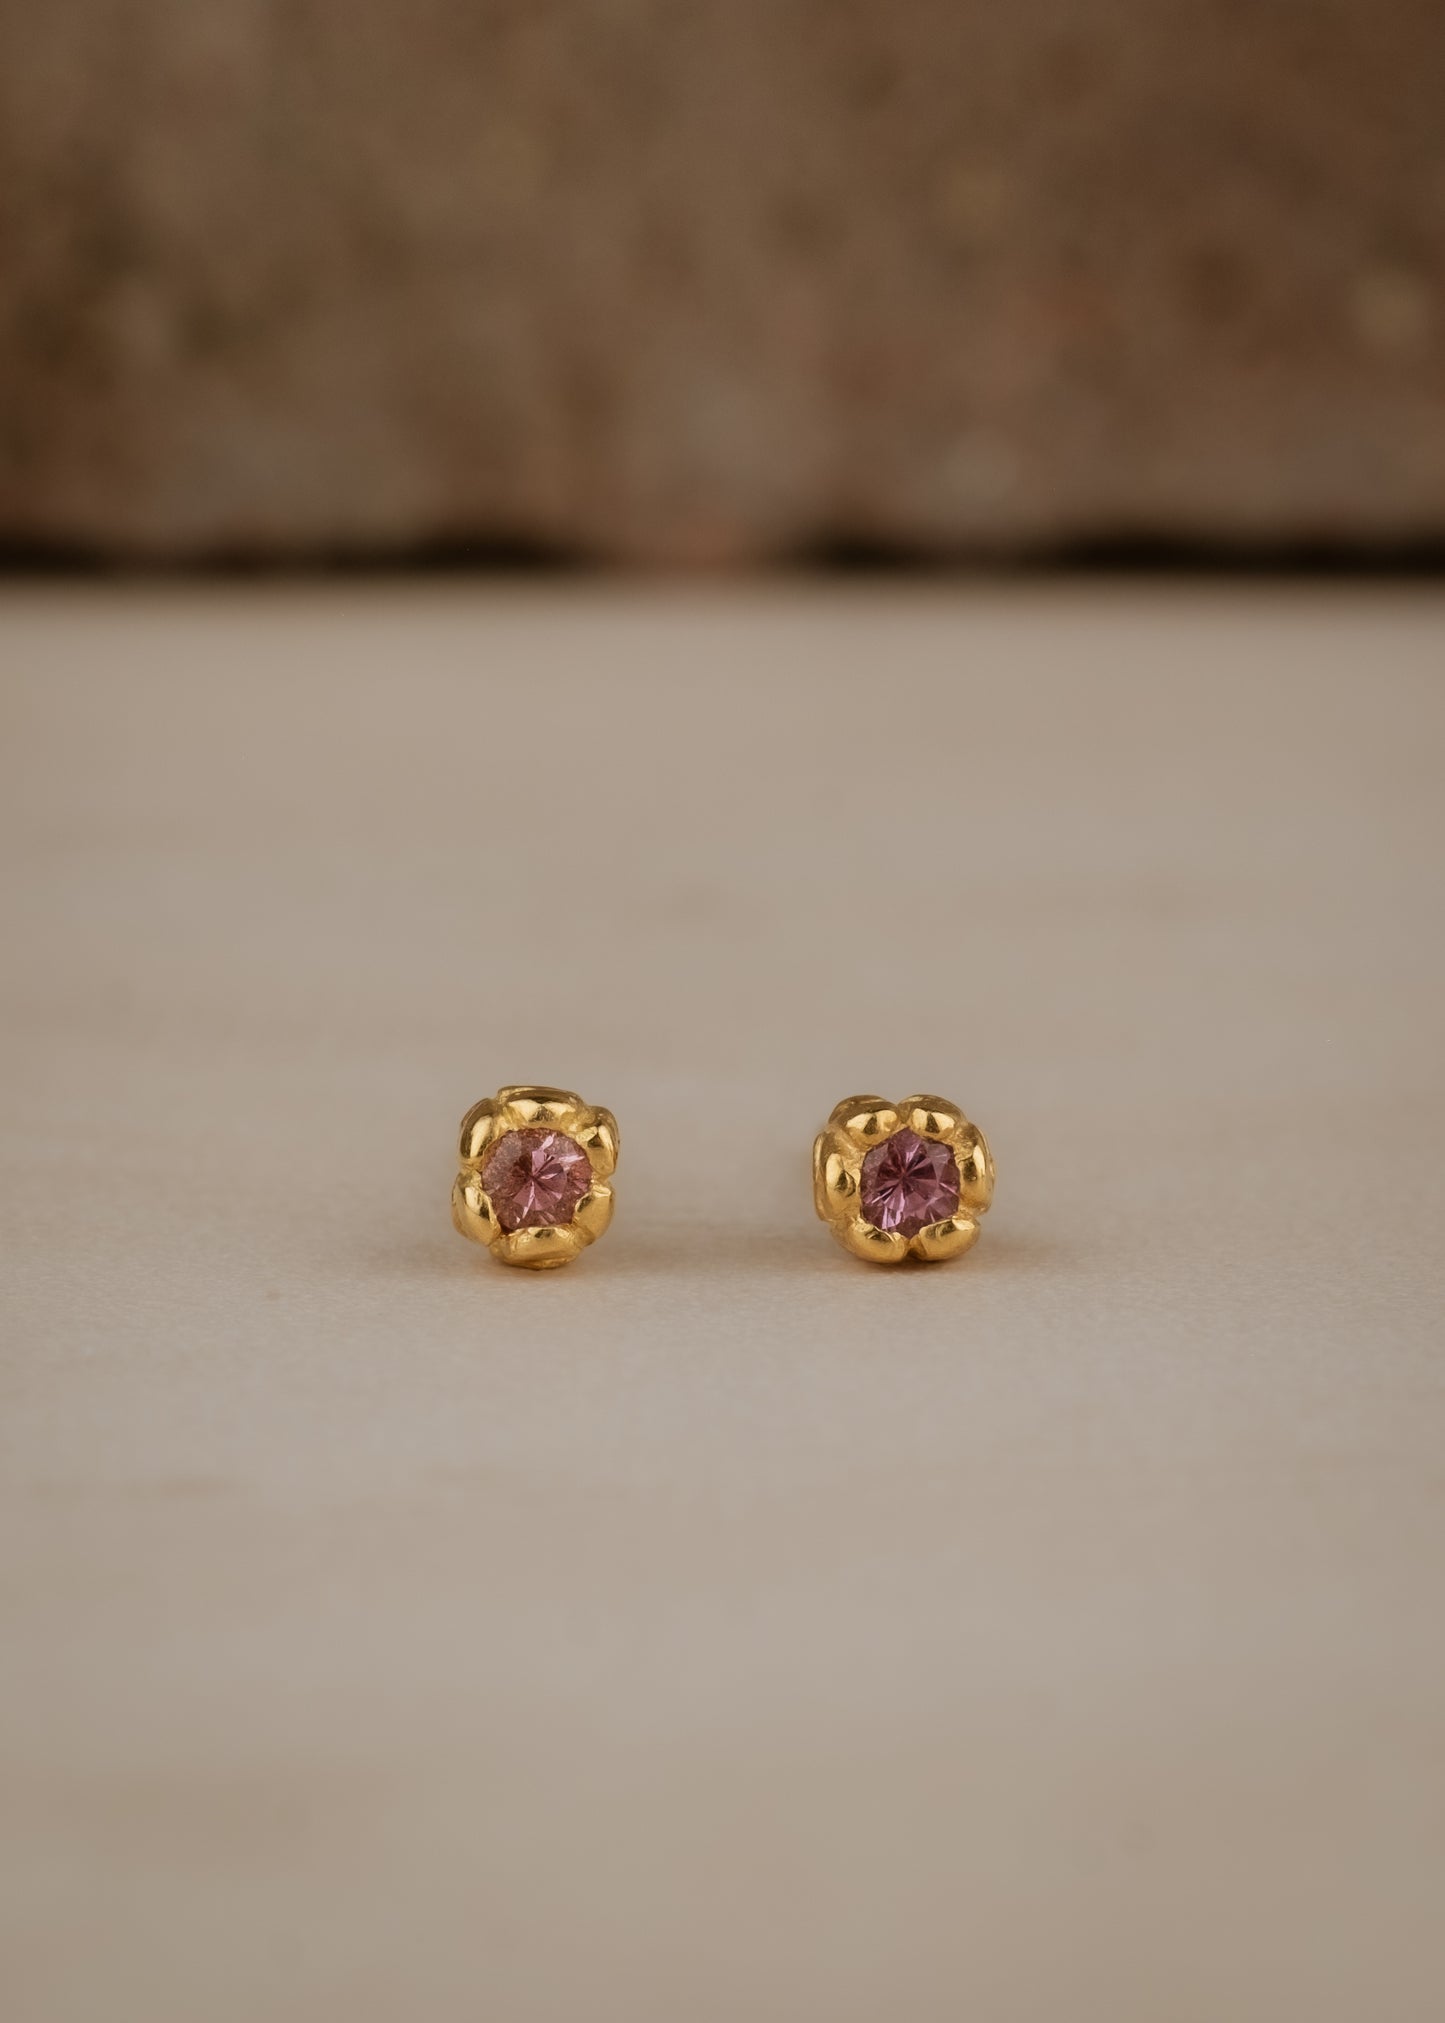 Inspired by a set of rings purchased for a childhood crush, the Bey earrings merge the simplicity of days past with a refined sophistication. Hand-crafted gold petals form a cocoon around a stunning pink sapphire, creating delicate earrings perfect for celebrating the everyday. 